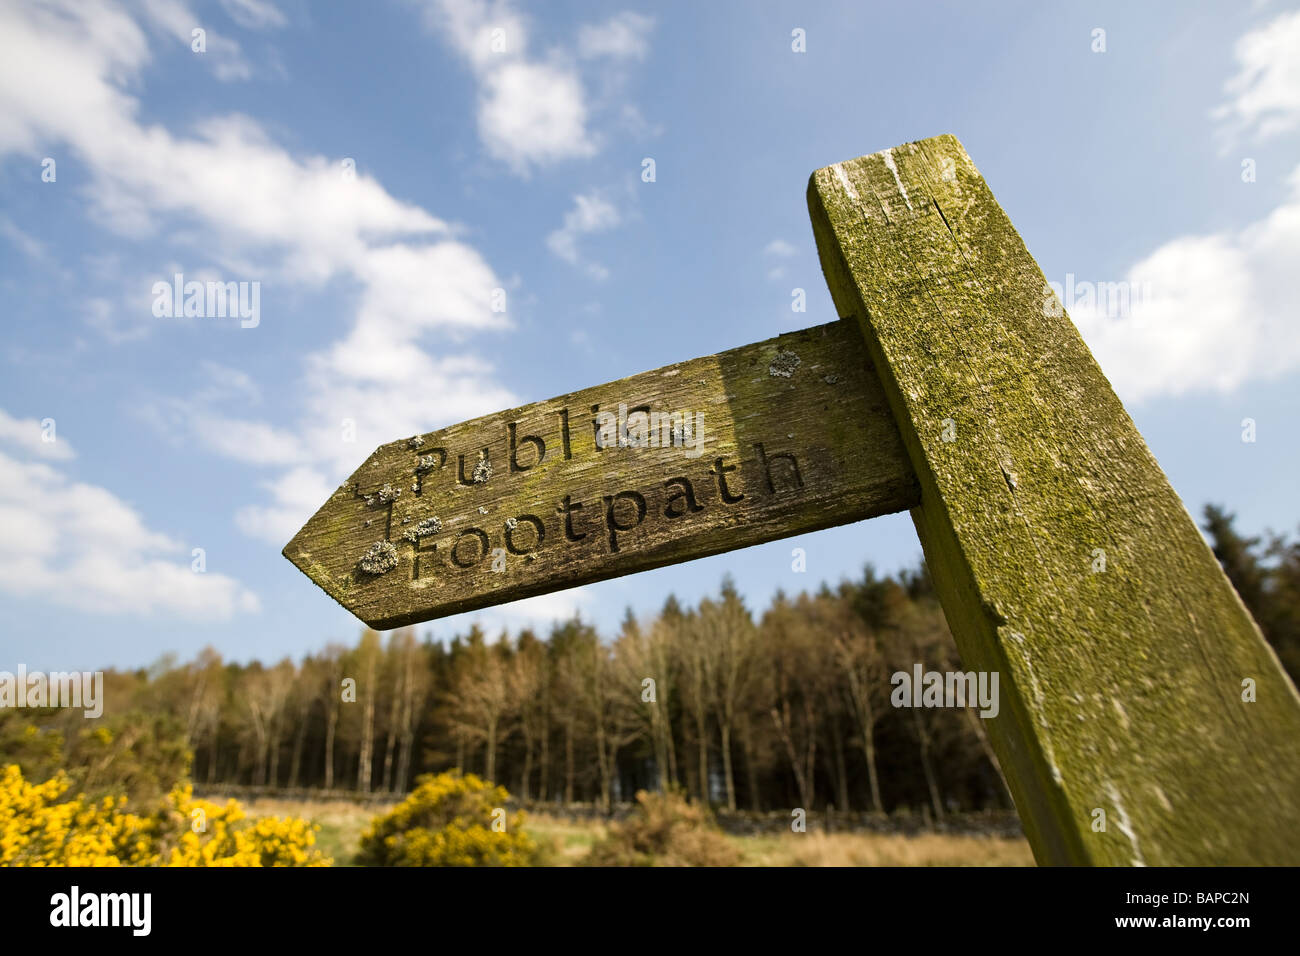 Wooden public footpath sign with forest and moorland in background and blue sky with light clouds Stock Photo